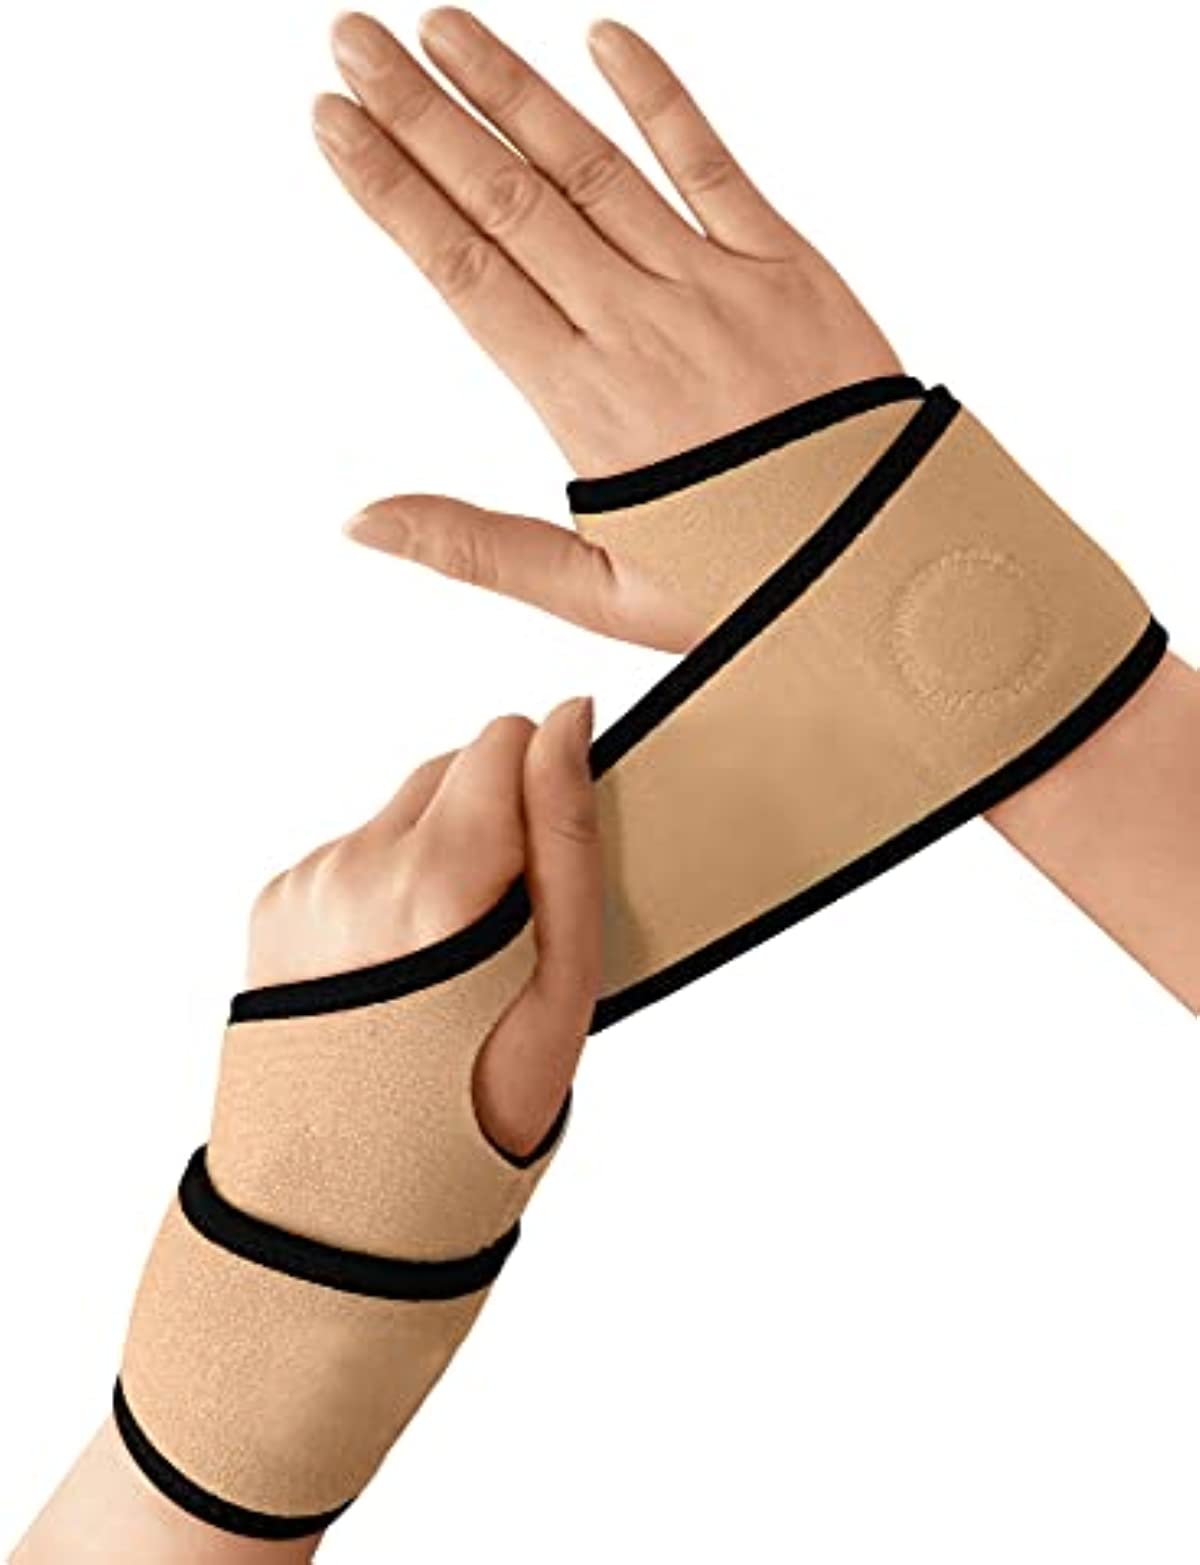 Doctor Developed Comfy, Lightweight, Wrist Support-Strap-Brace-Hand Support, Perfect fit for both Right and Left Hand, for Men and Women by Dr Arthritis (Nude, 2 Pack)